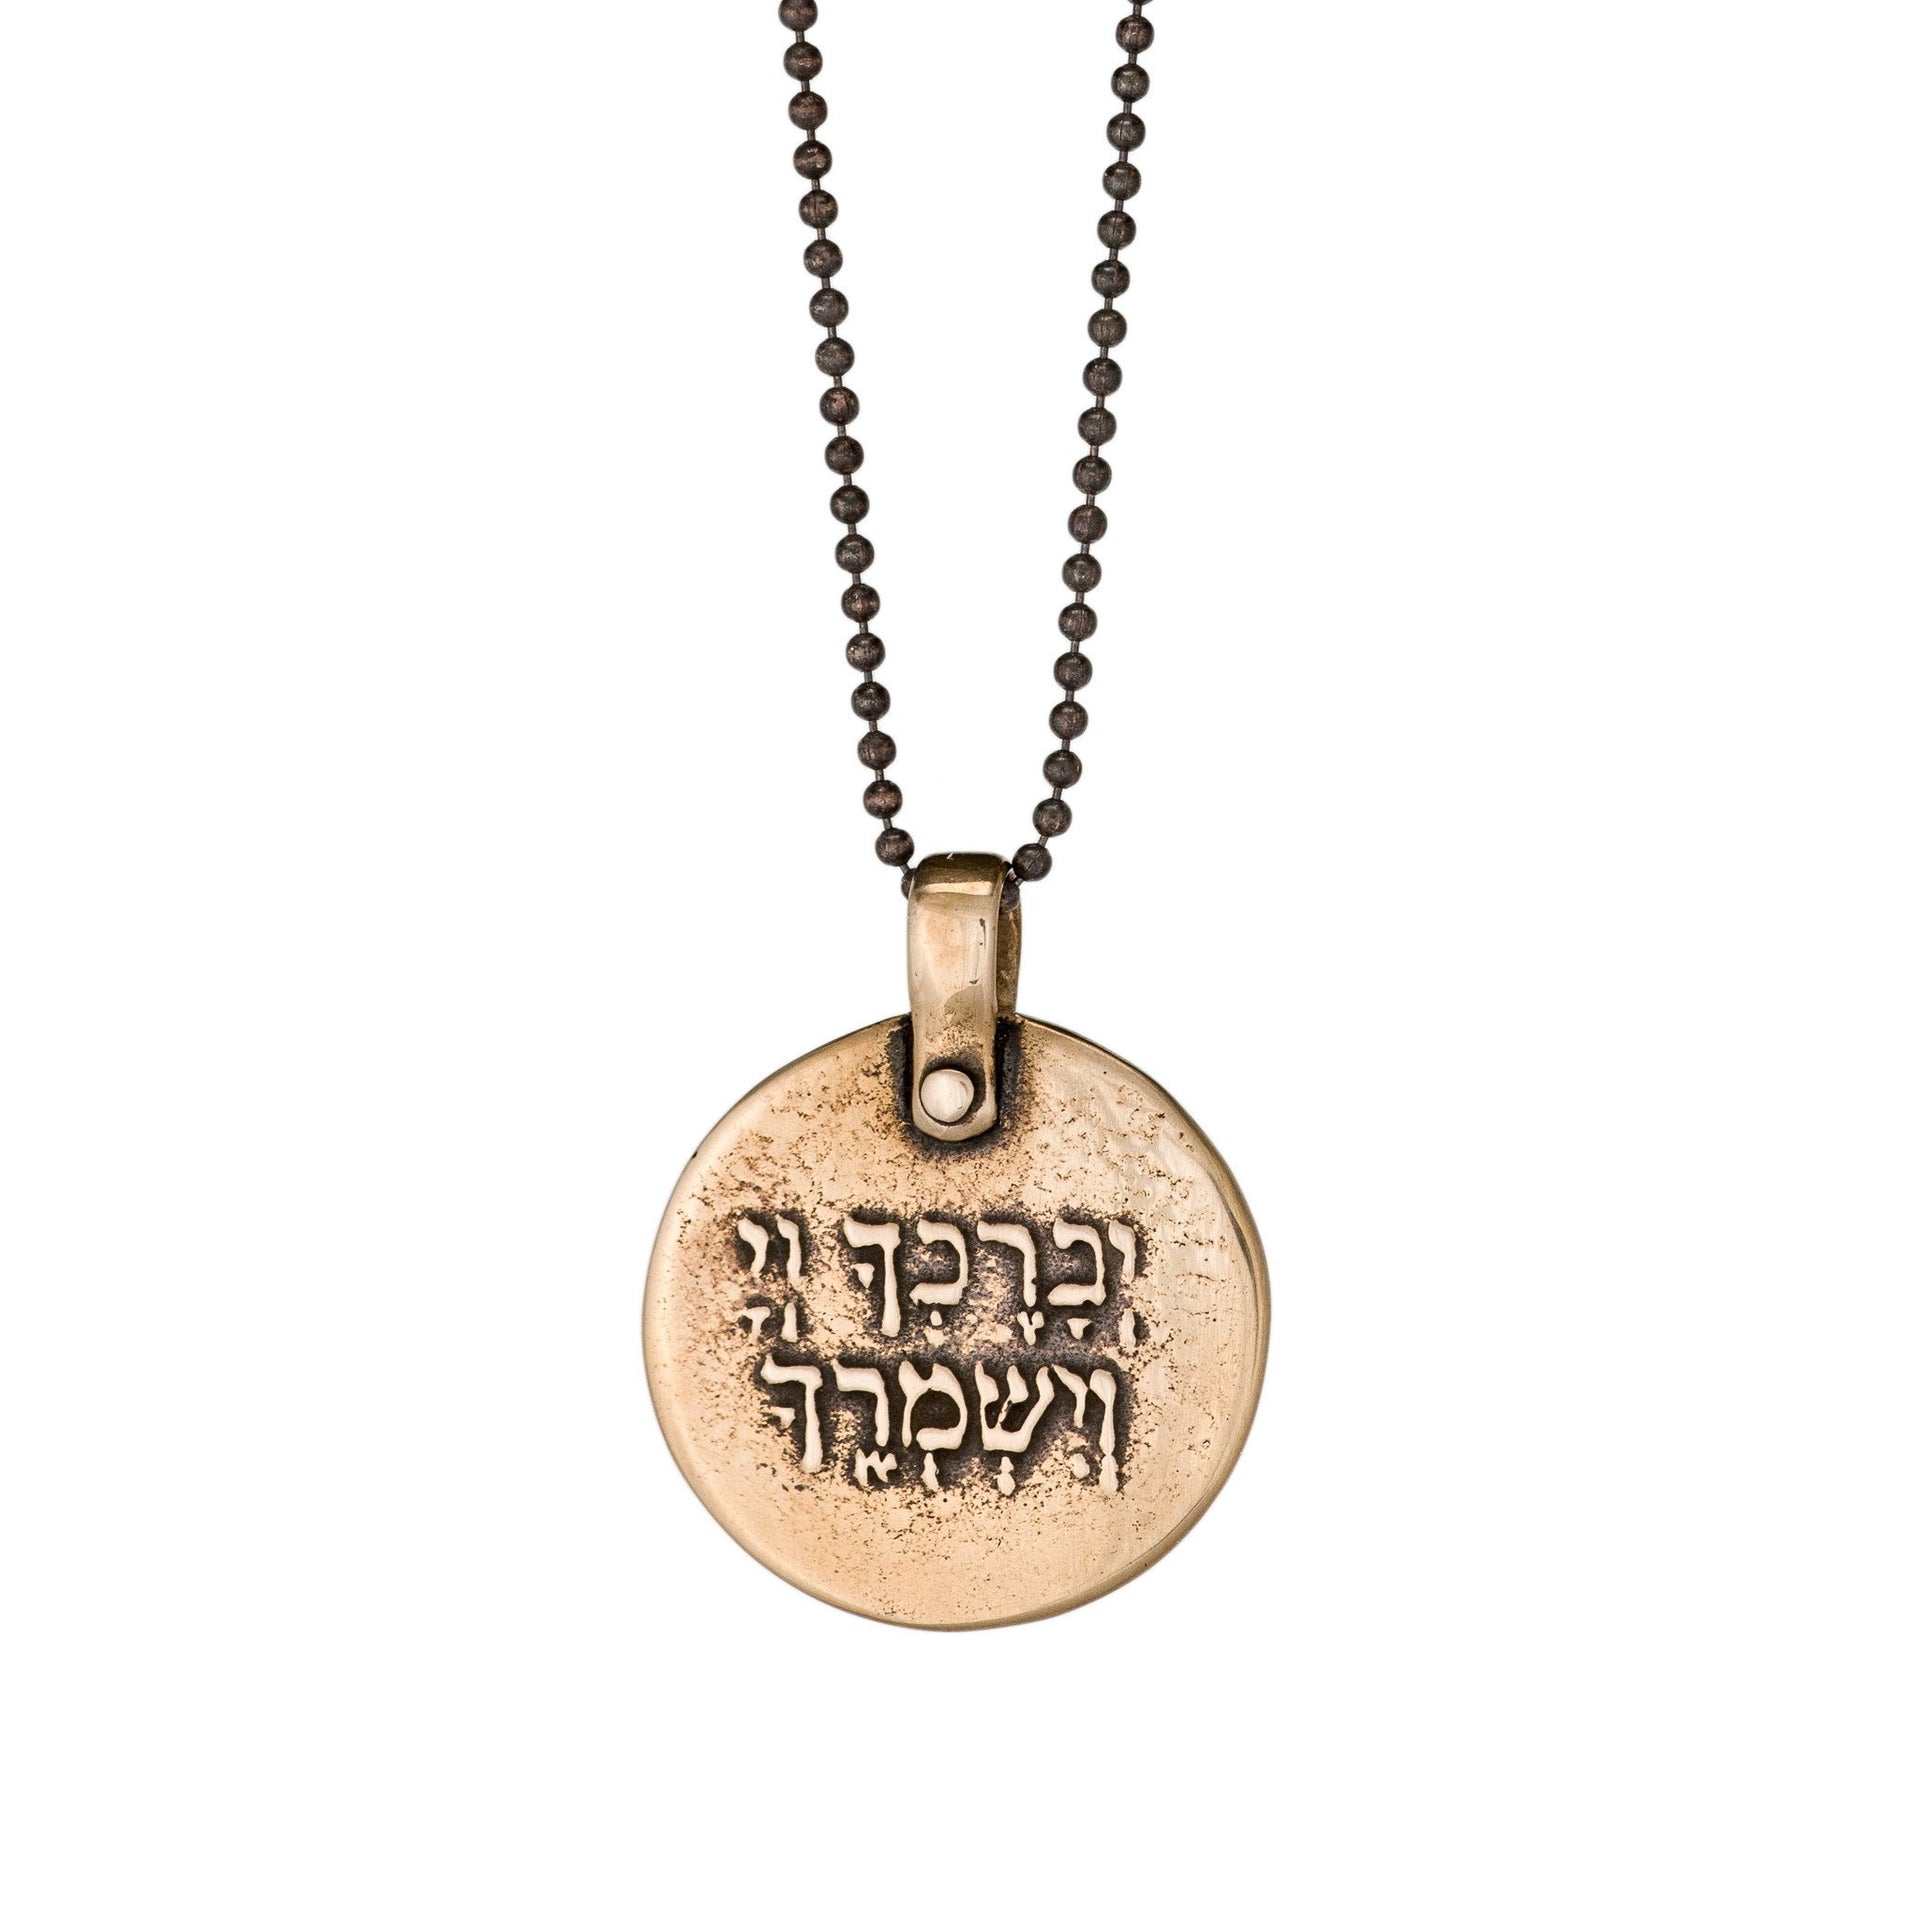 Marla Studio Necklaces Bronze / Chain / 18" Lord Bless You and Protect You Necklace by Marla Studio - Silver or Bronze